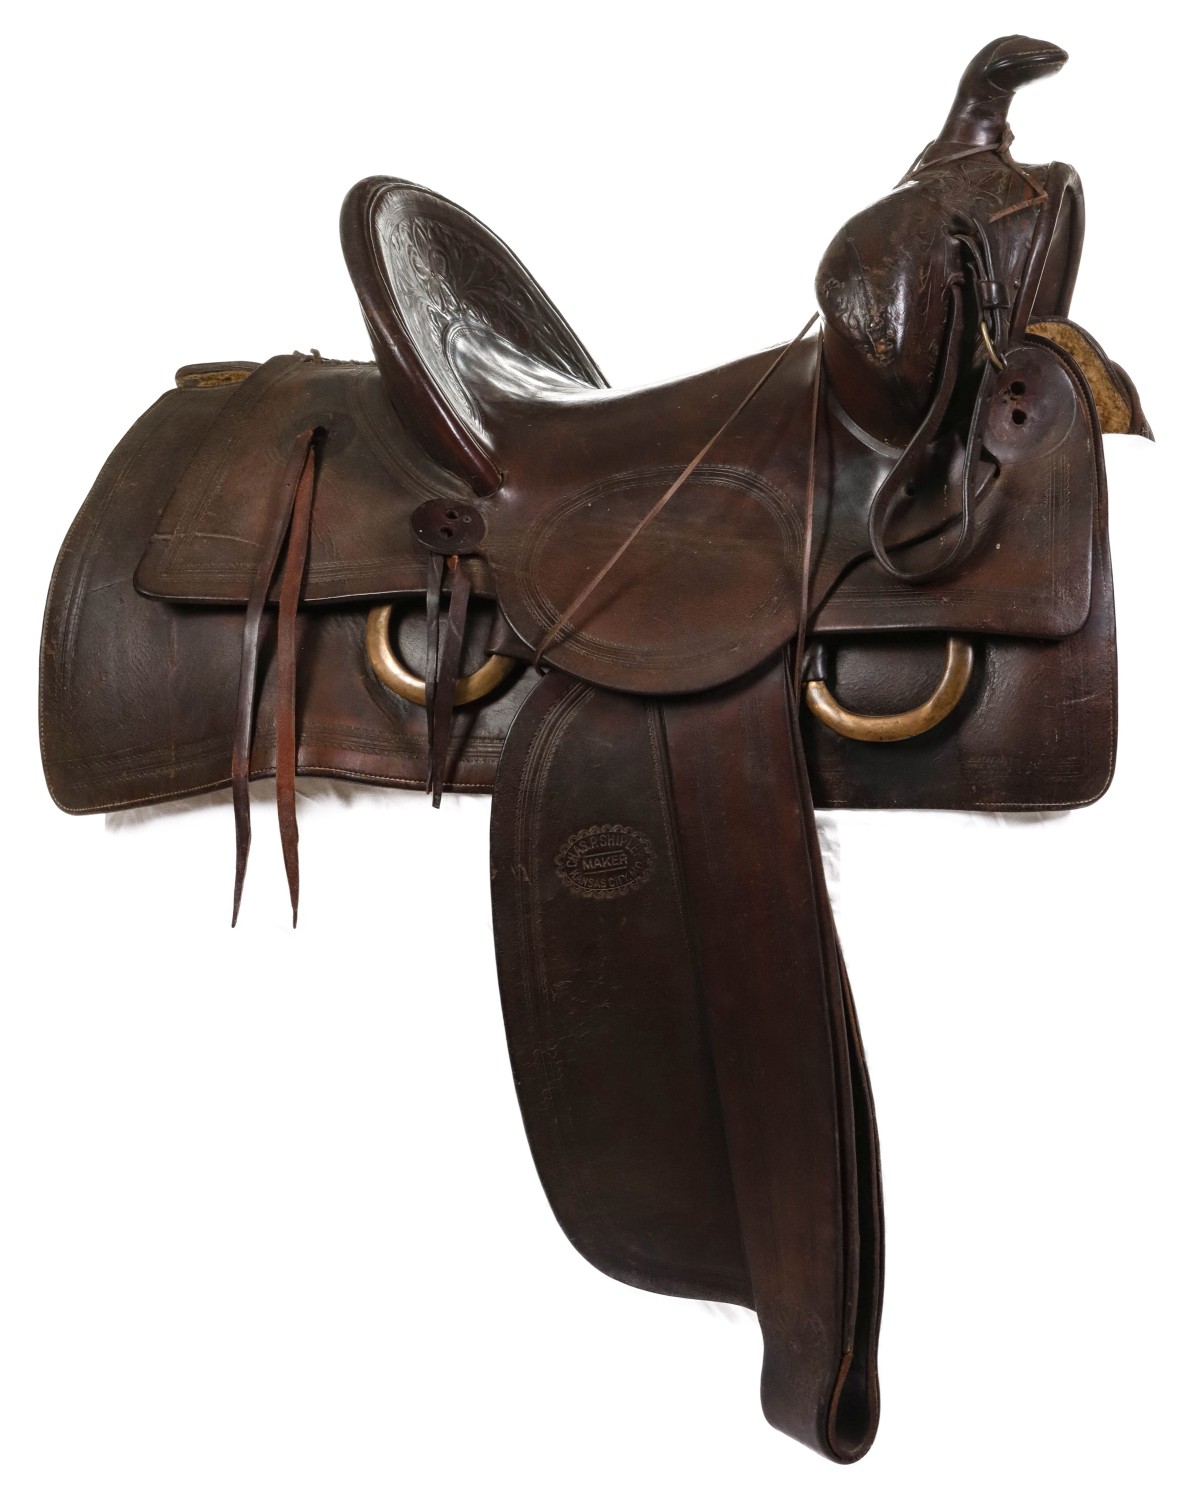 CHARLES P. SHIPLEY SEMI-PLAIN SADDLE WITH STAMPING